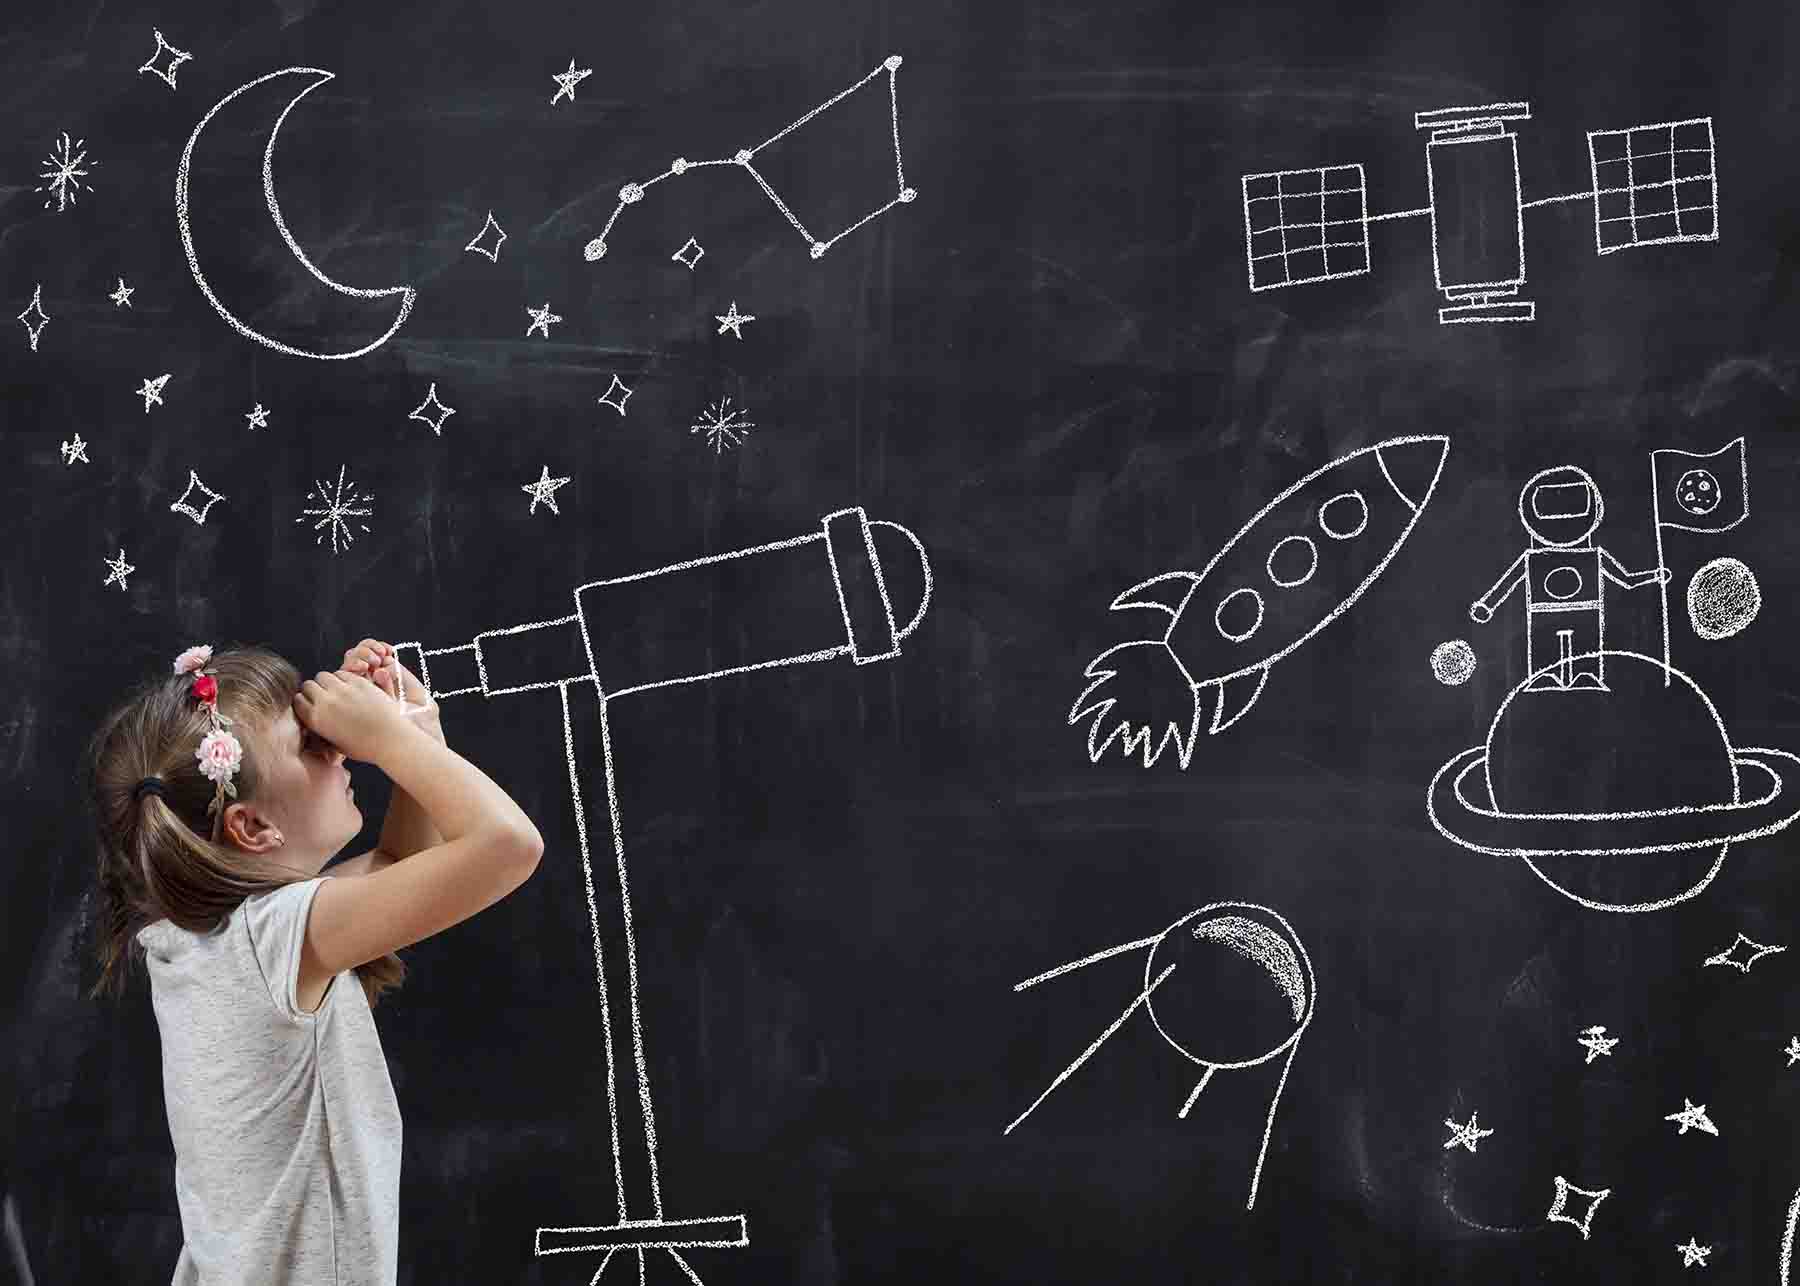 Little girl standing next to a chalk board with star exploration drawings